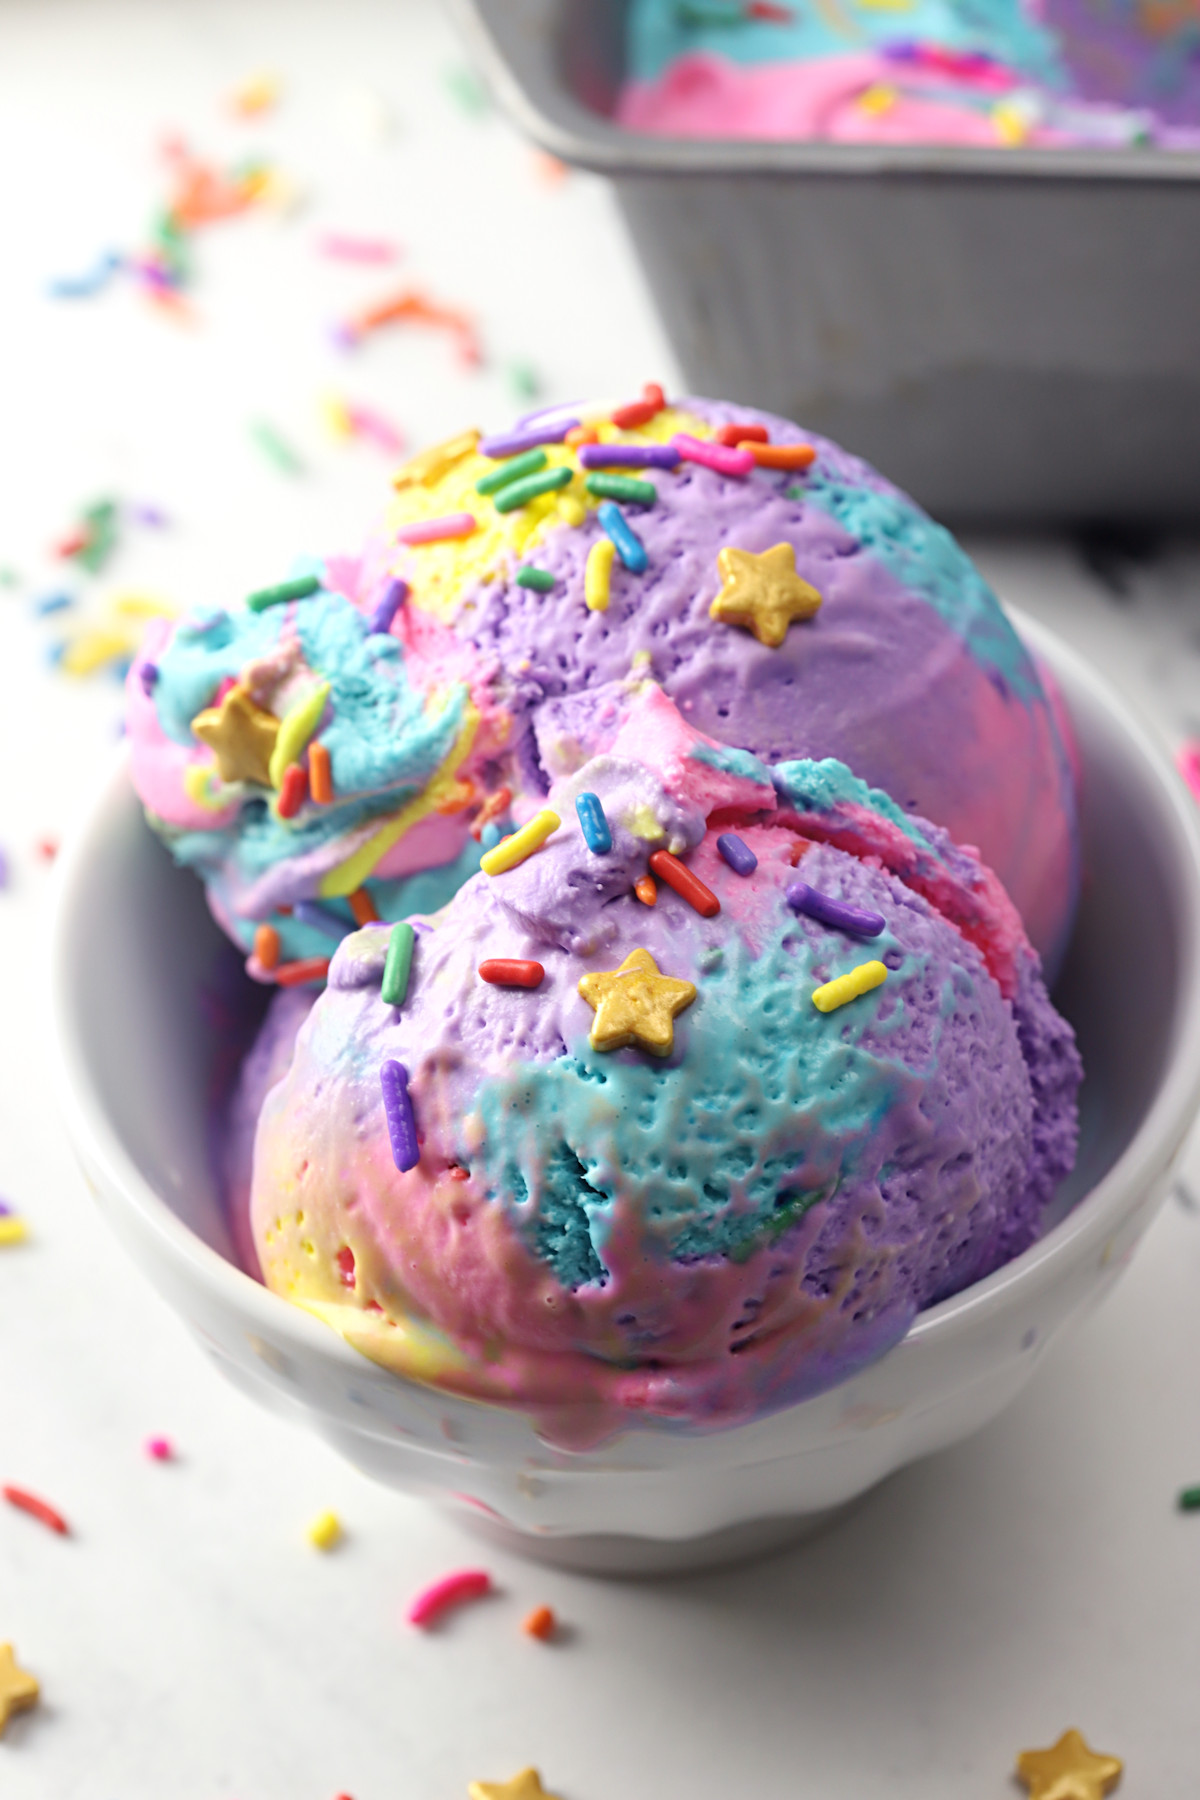 Bowl of rainbow ice cream with sprinkles on top.